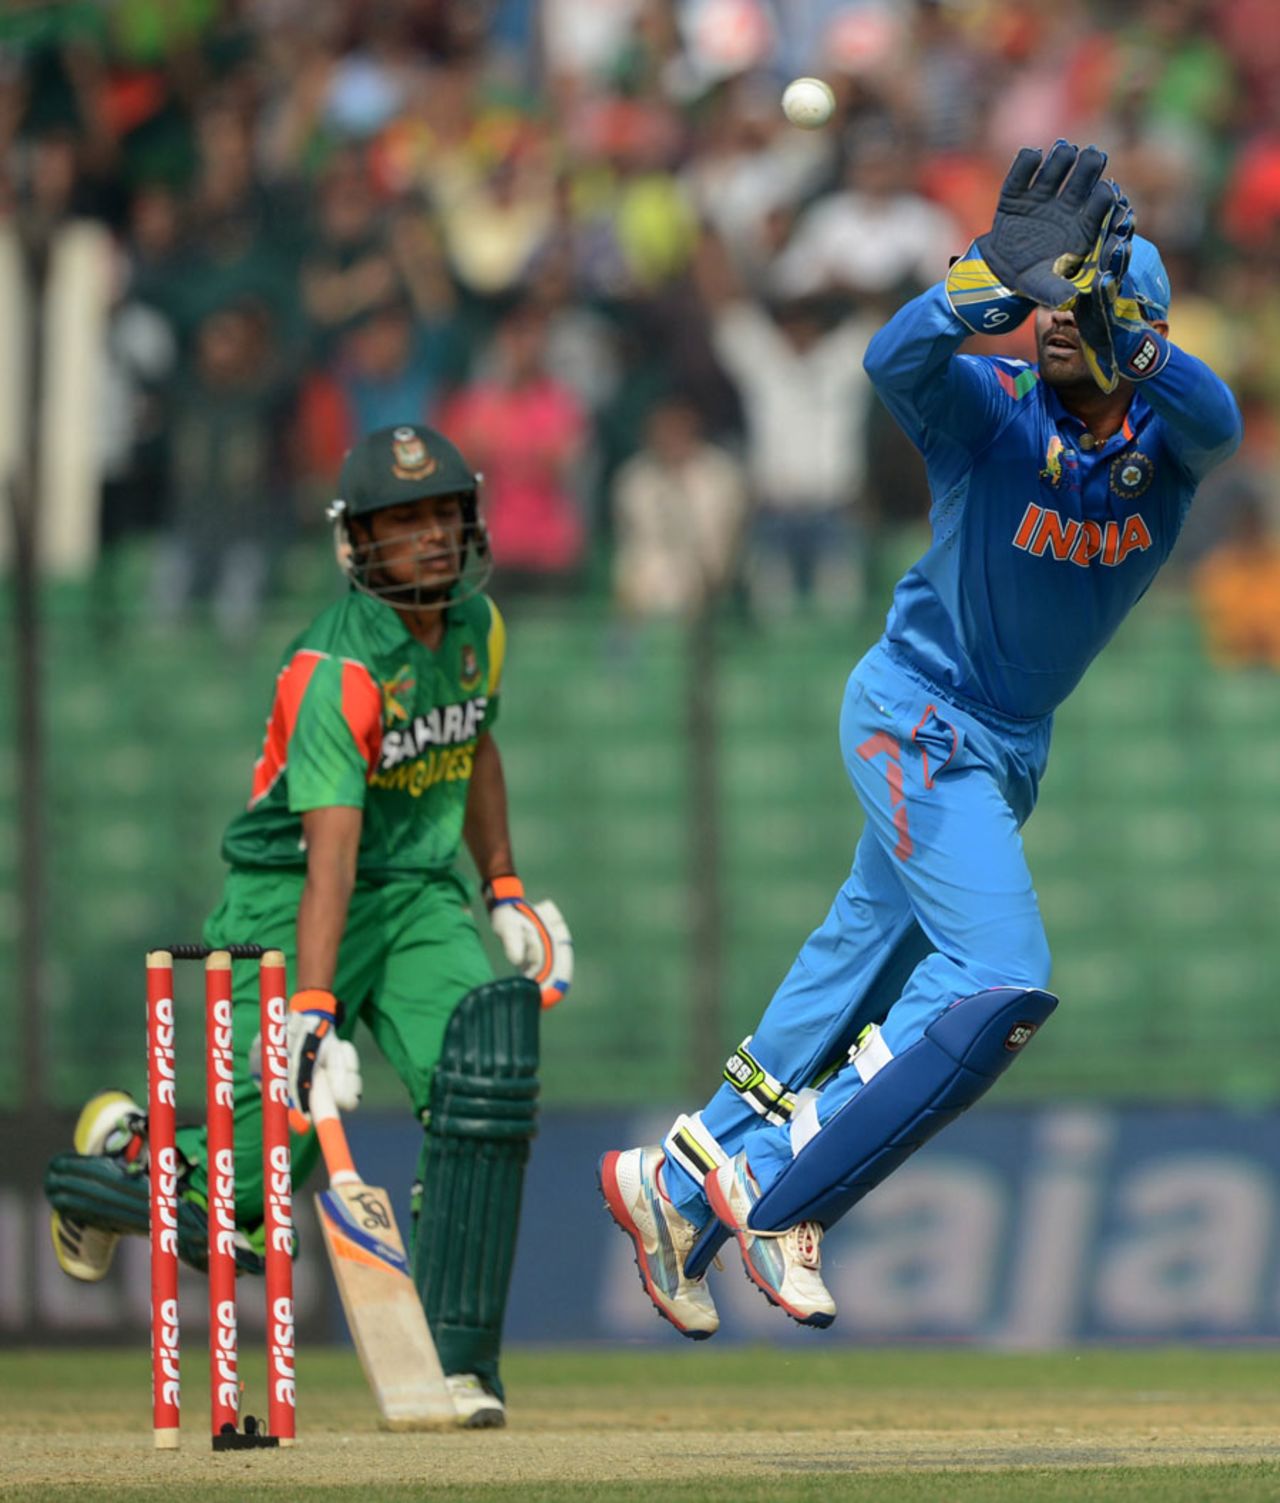 Dinesh Karthik collects the ball, Bangladesh v India, Asia Cup 2014, Fatullah, February 26, 2014